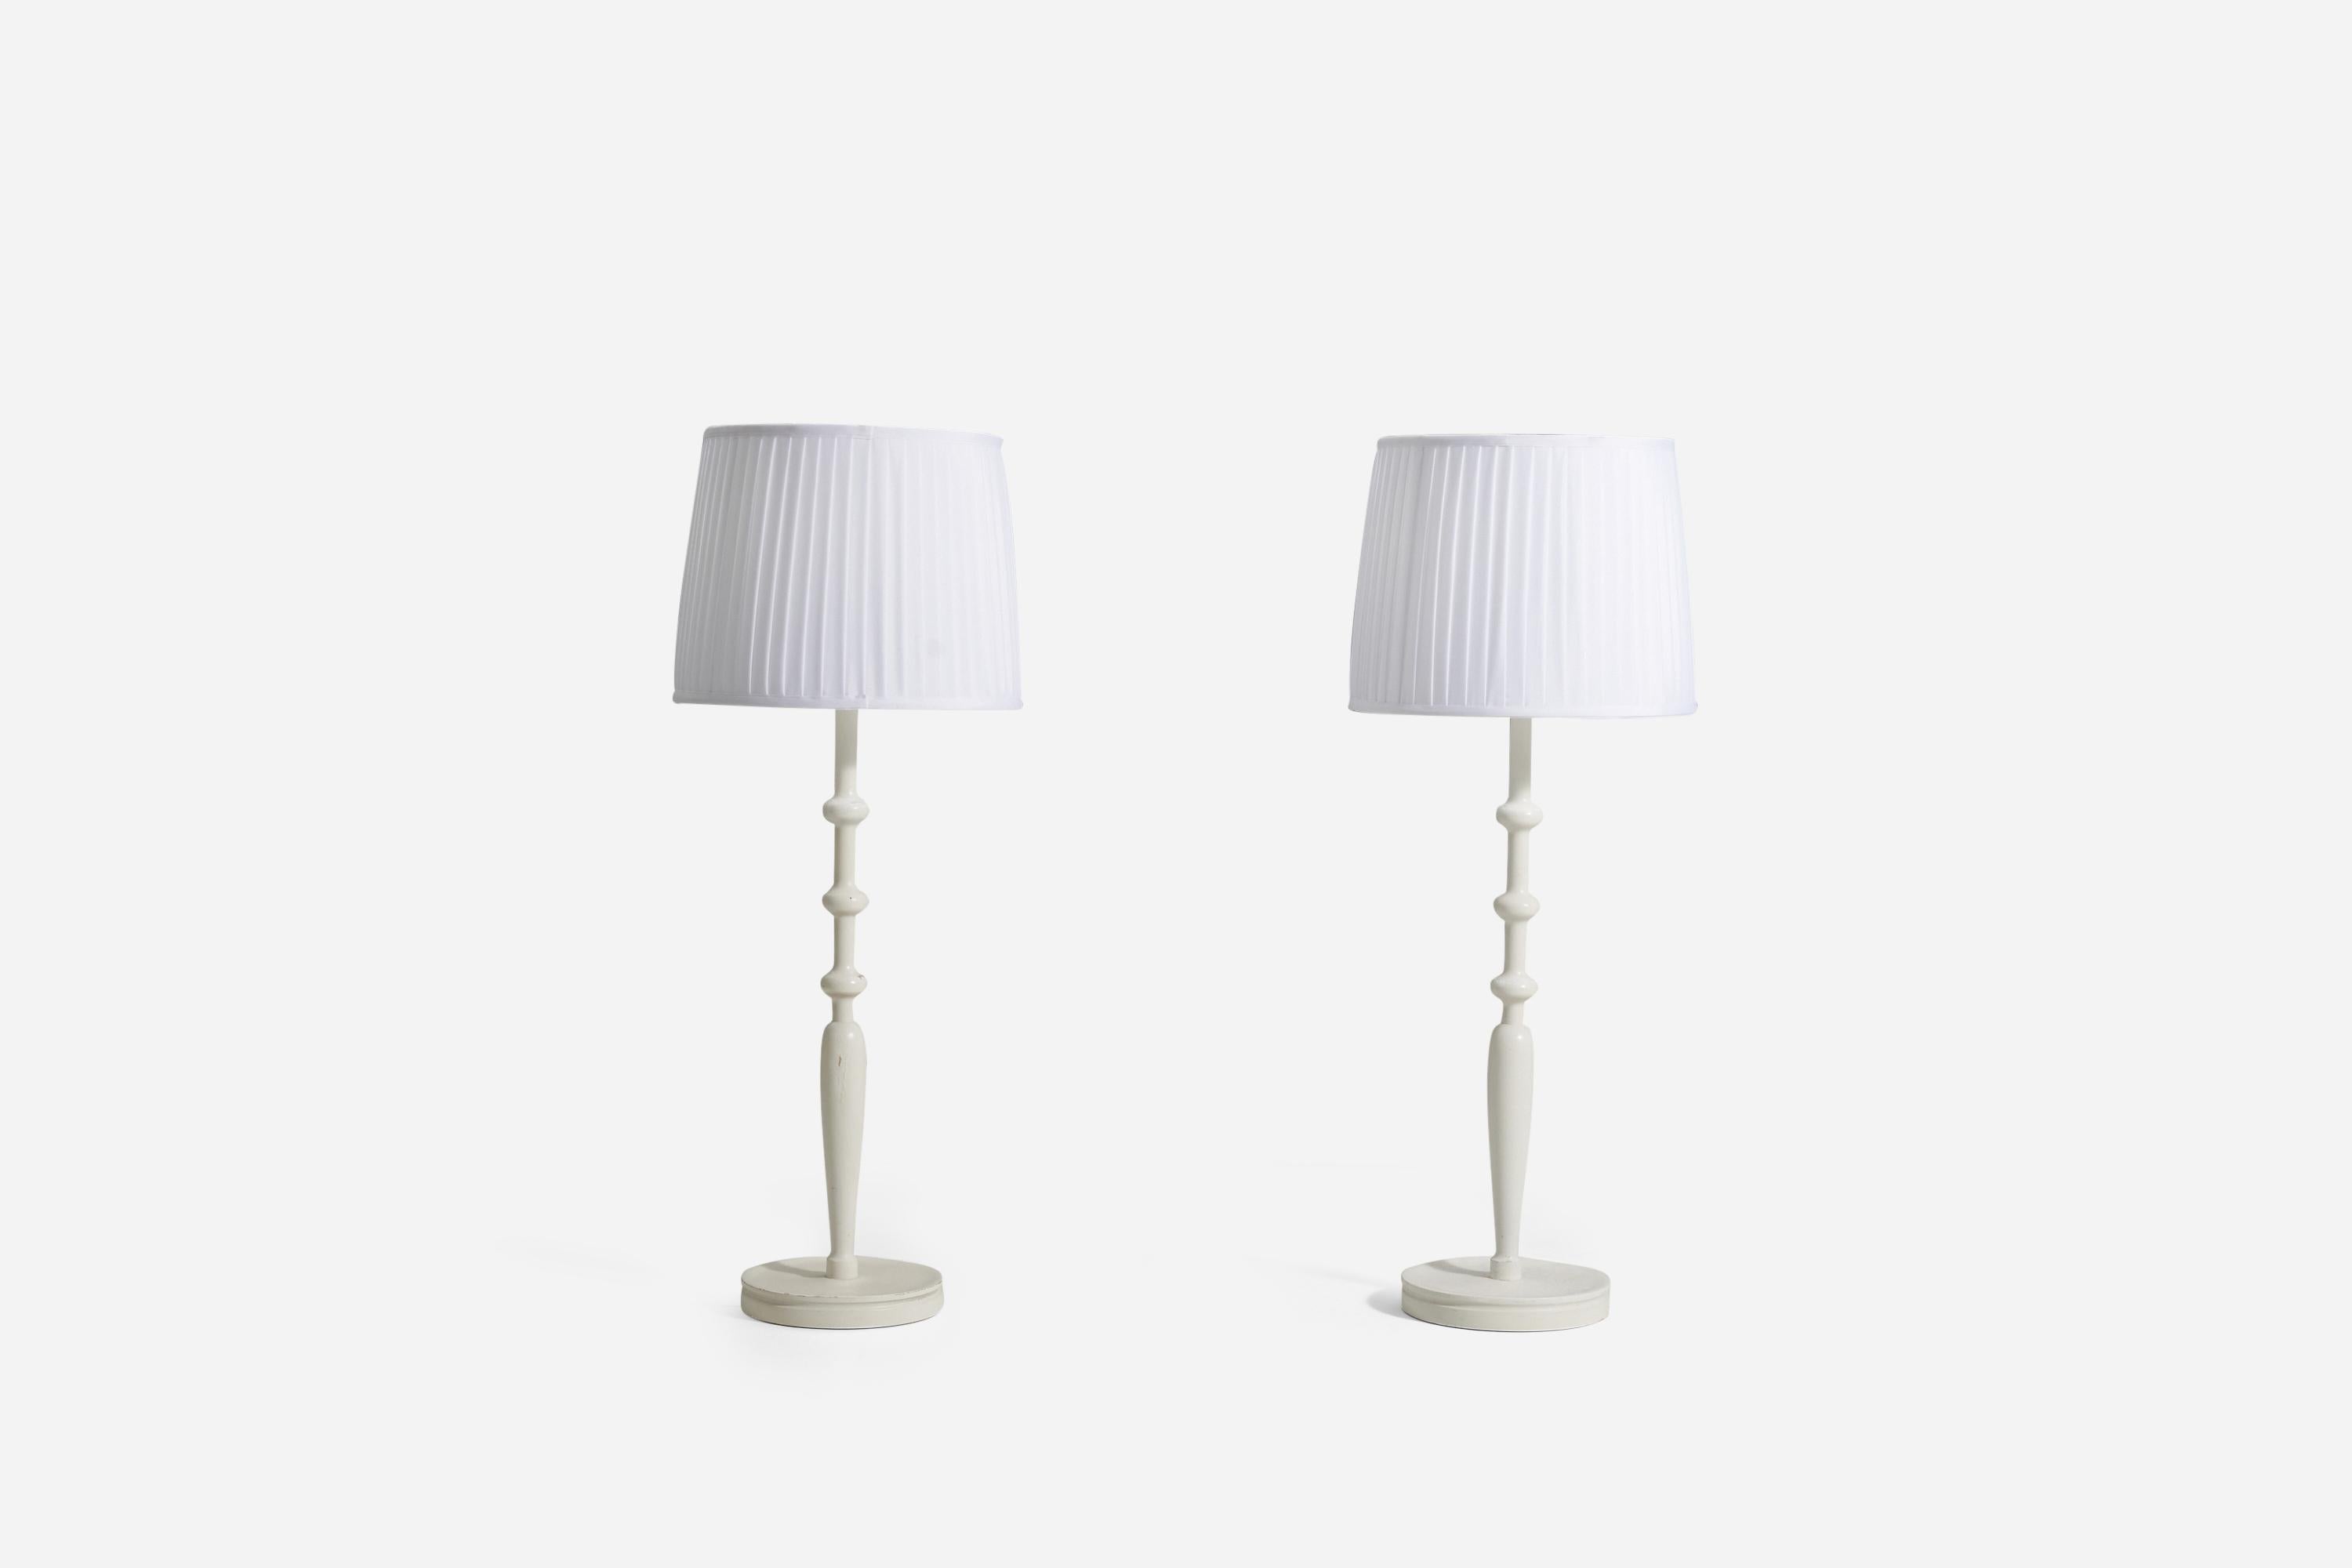 A pair of large table lamps for Svenskt Tenn, Stockholm, Sweden. In painted turned wood.

Lampshades are not included, stated dimensions are without lampshades.

Other lighting designers of the period include Paavo Tynell, Alvar Aalto, Serge